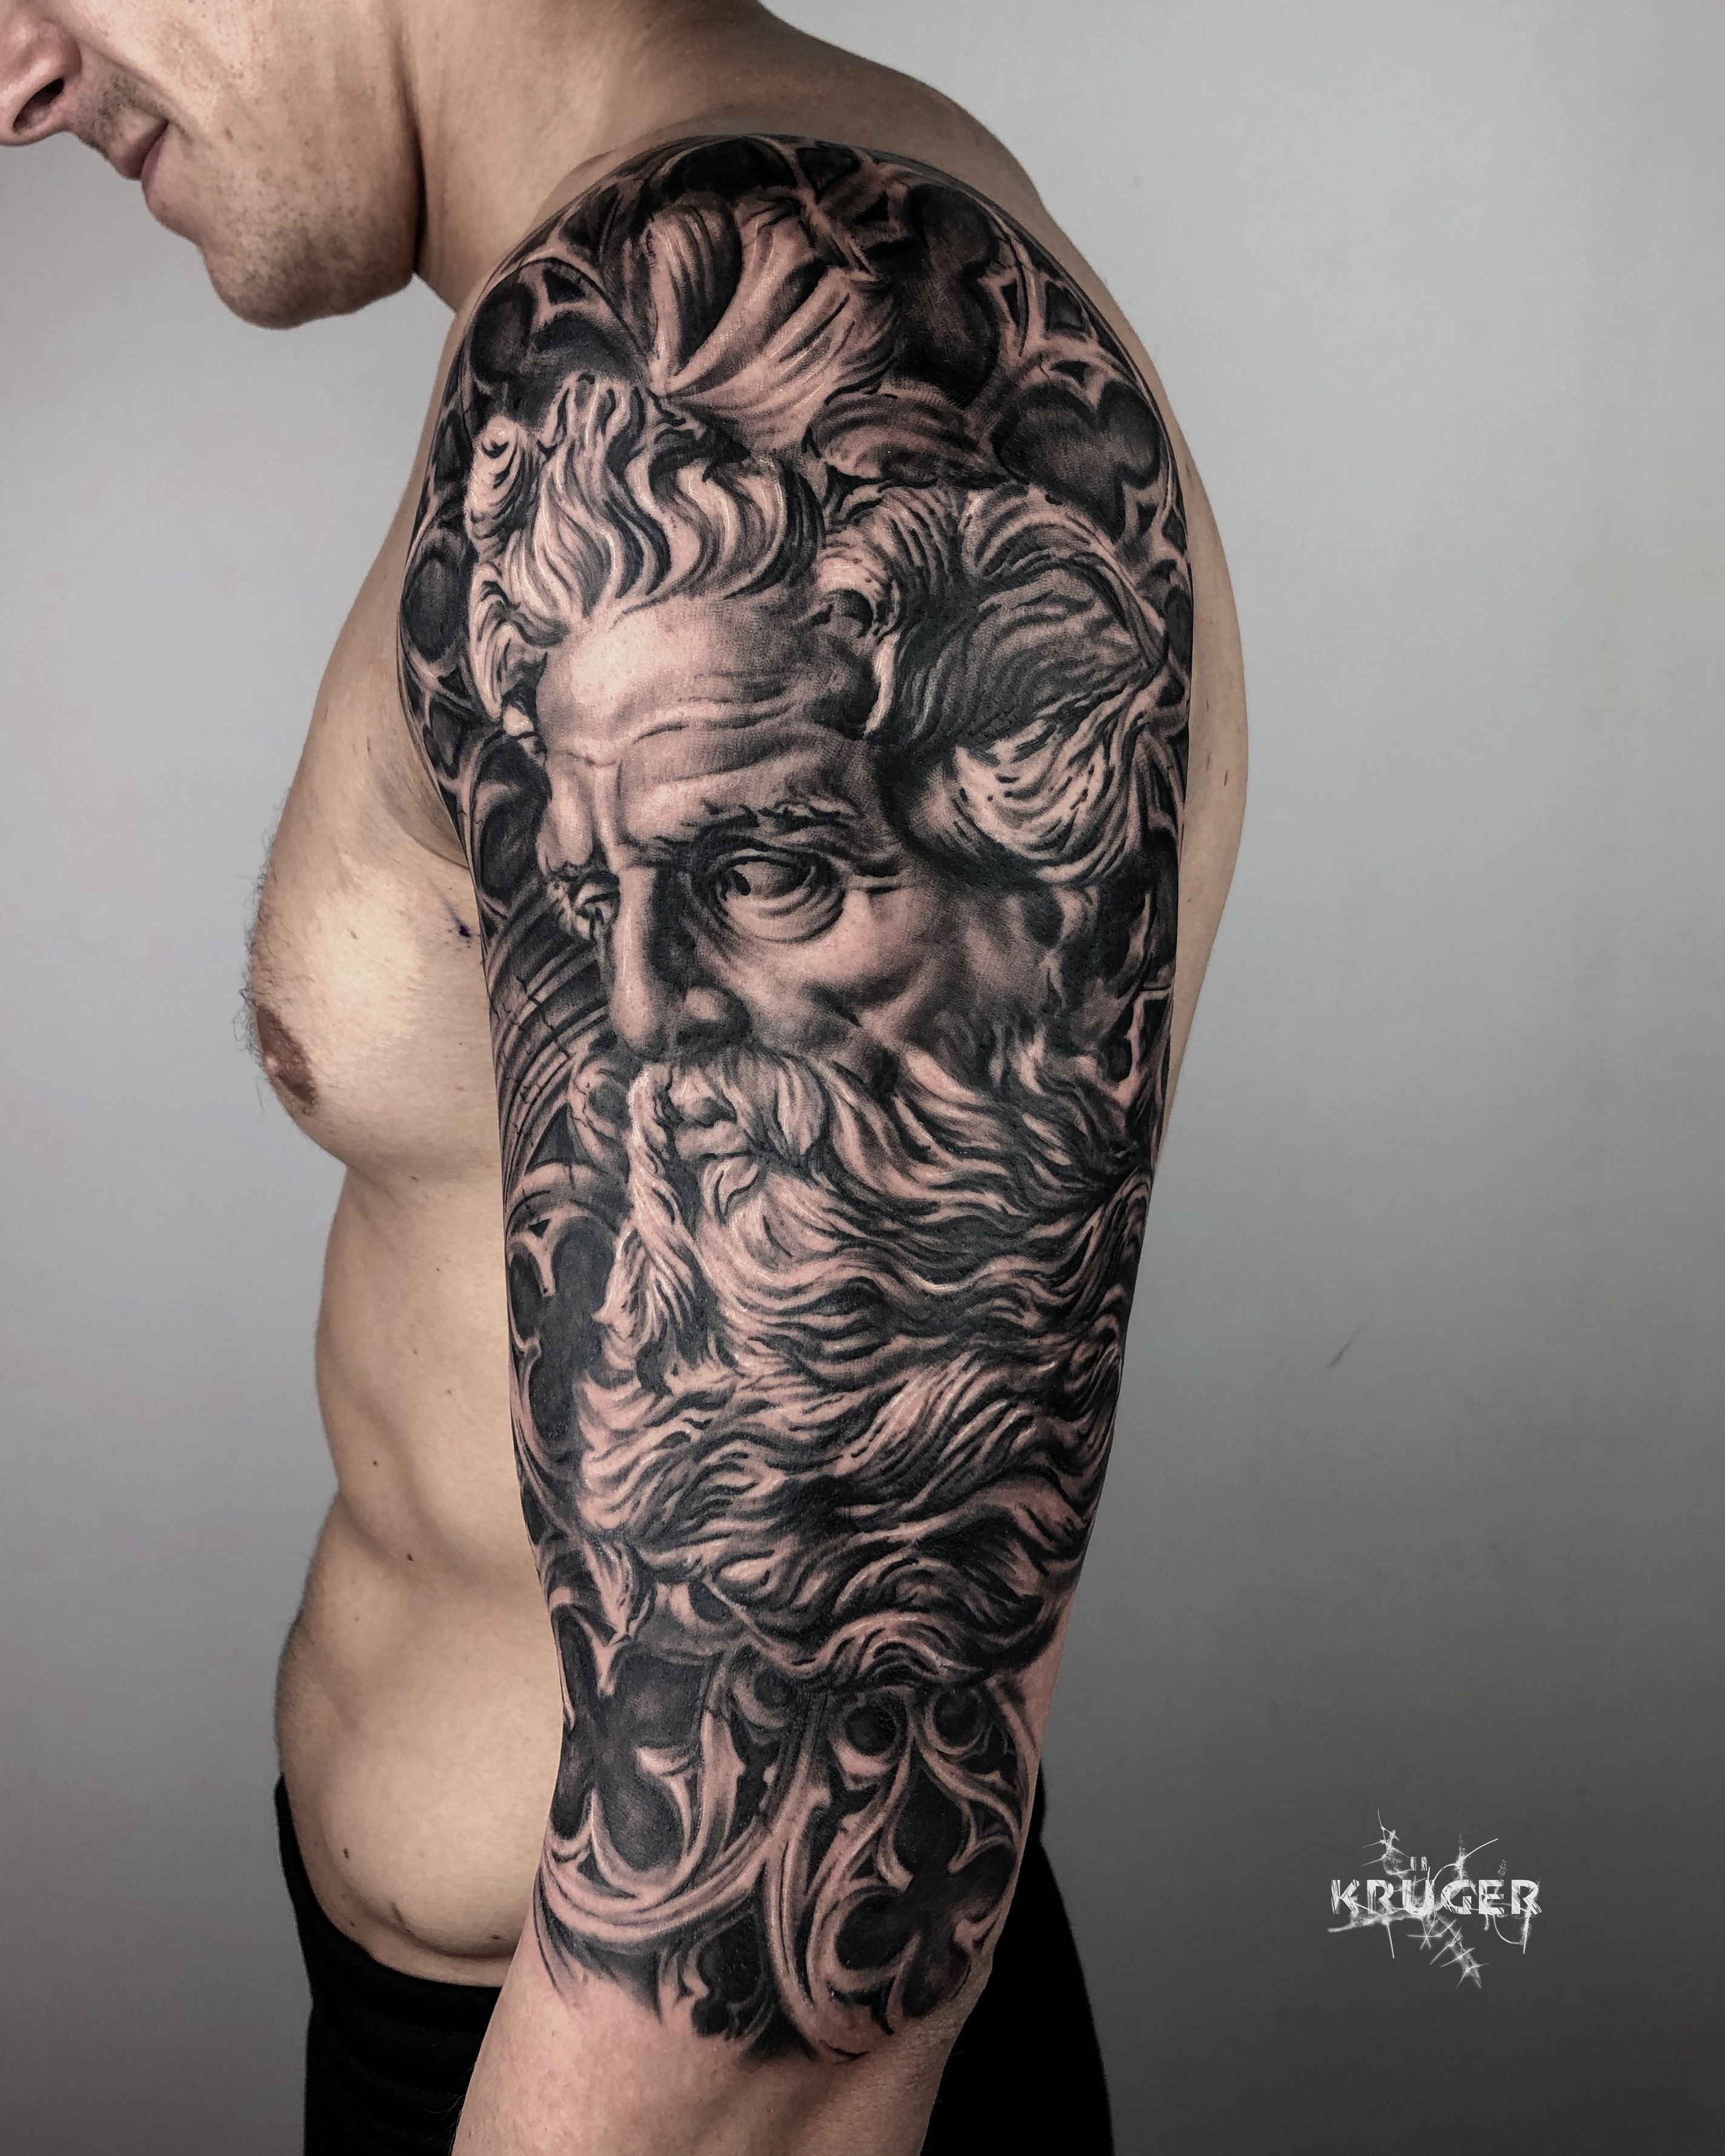 250 Best Zeus Tattoo Designs With Meanings 2022 Greek Mythology   TattoosBoyGirl  Zeus tattoo Greek mythology tattoos Greek tattoos